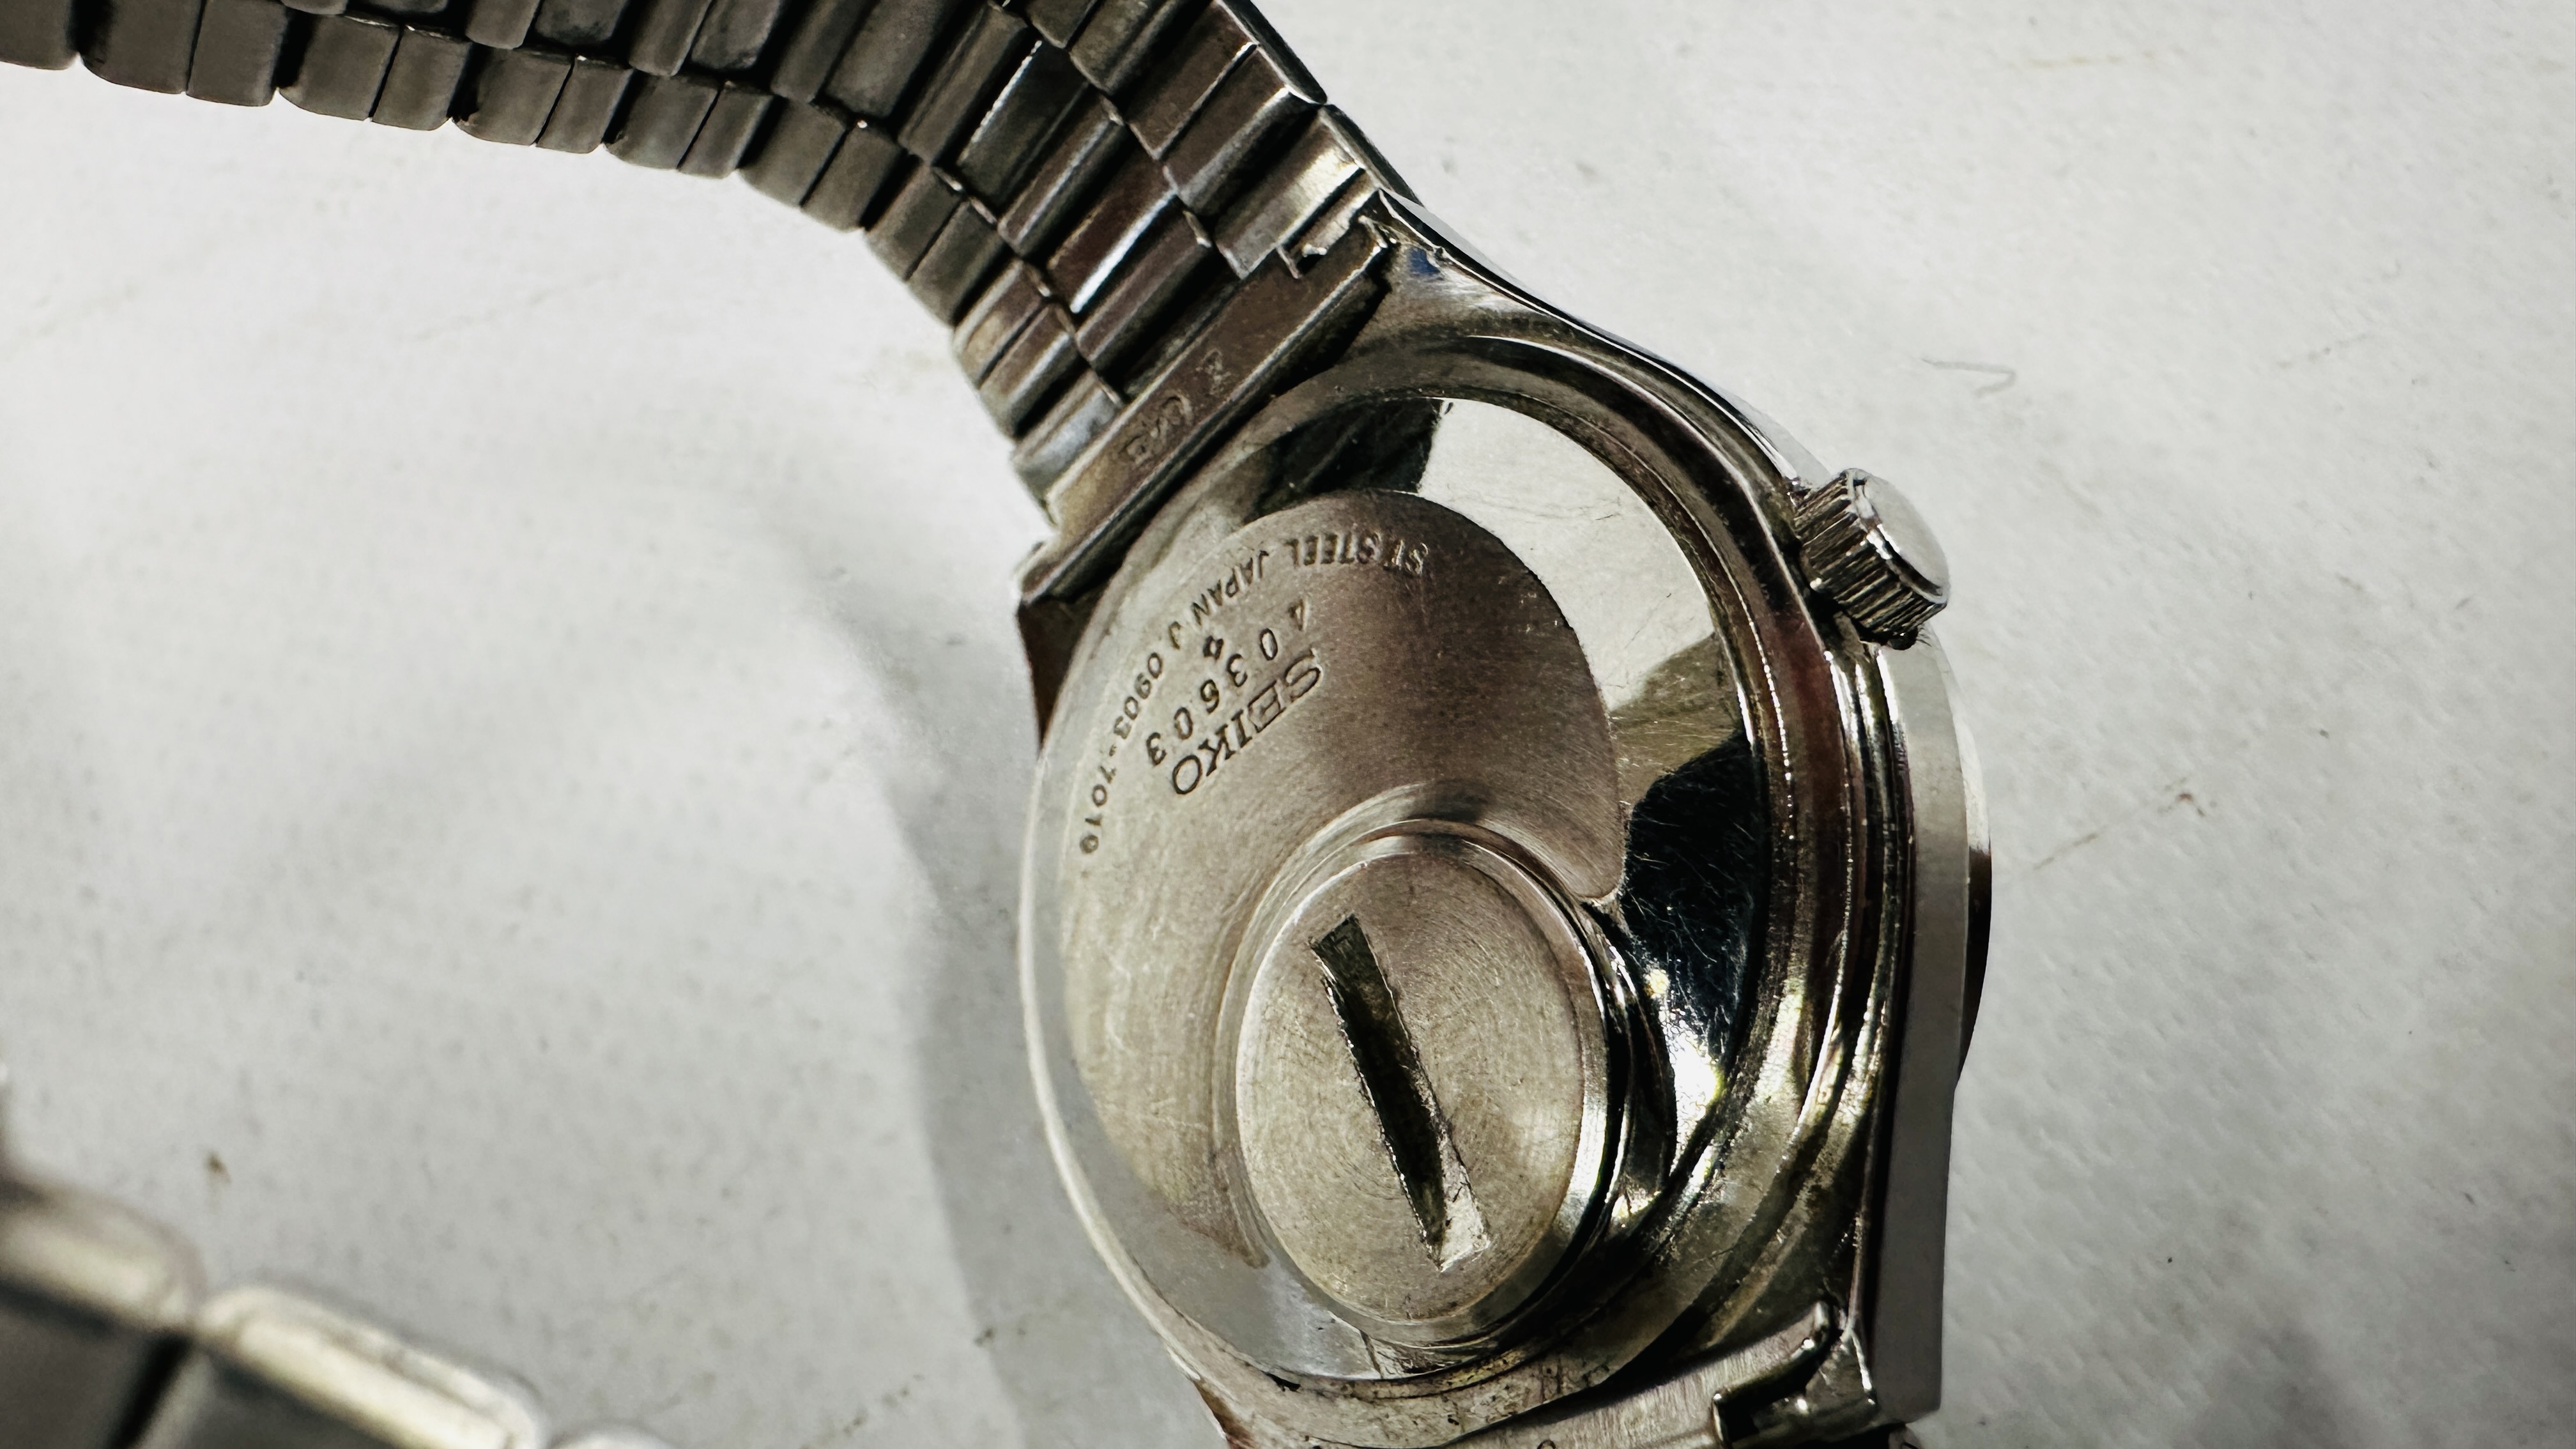 A GENT'S SEIKO STAINLESS STEEL BRACELET WRIST WATCH BOXED WITH INSTRUCTIONS - 1977. - Image 8 of 8